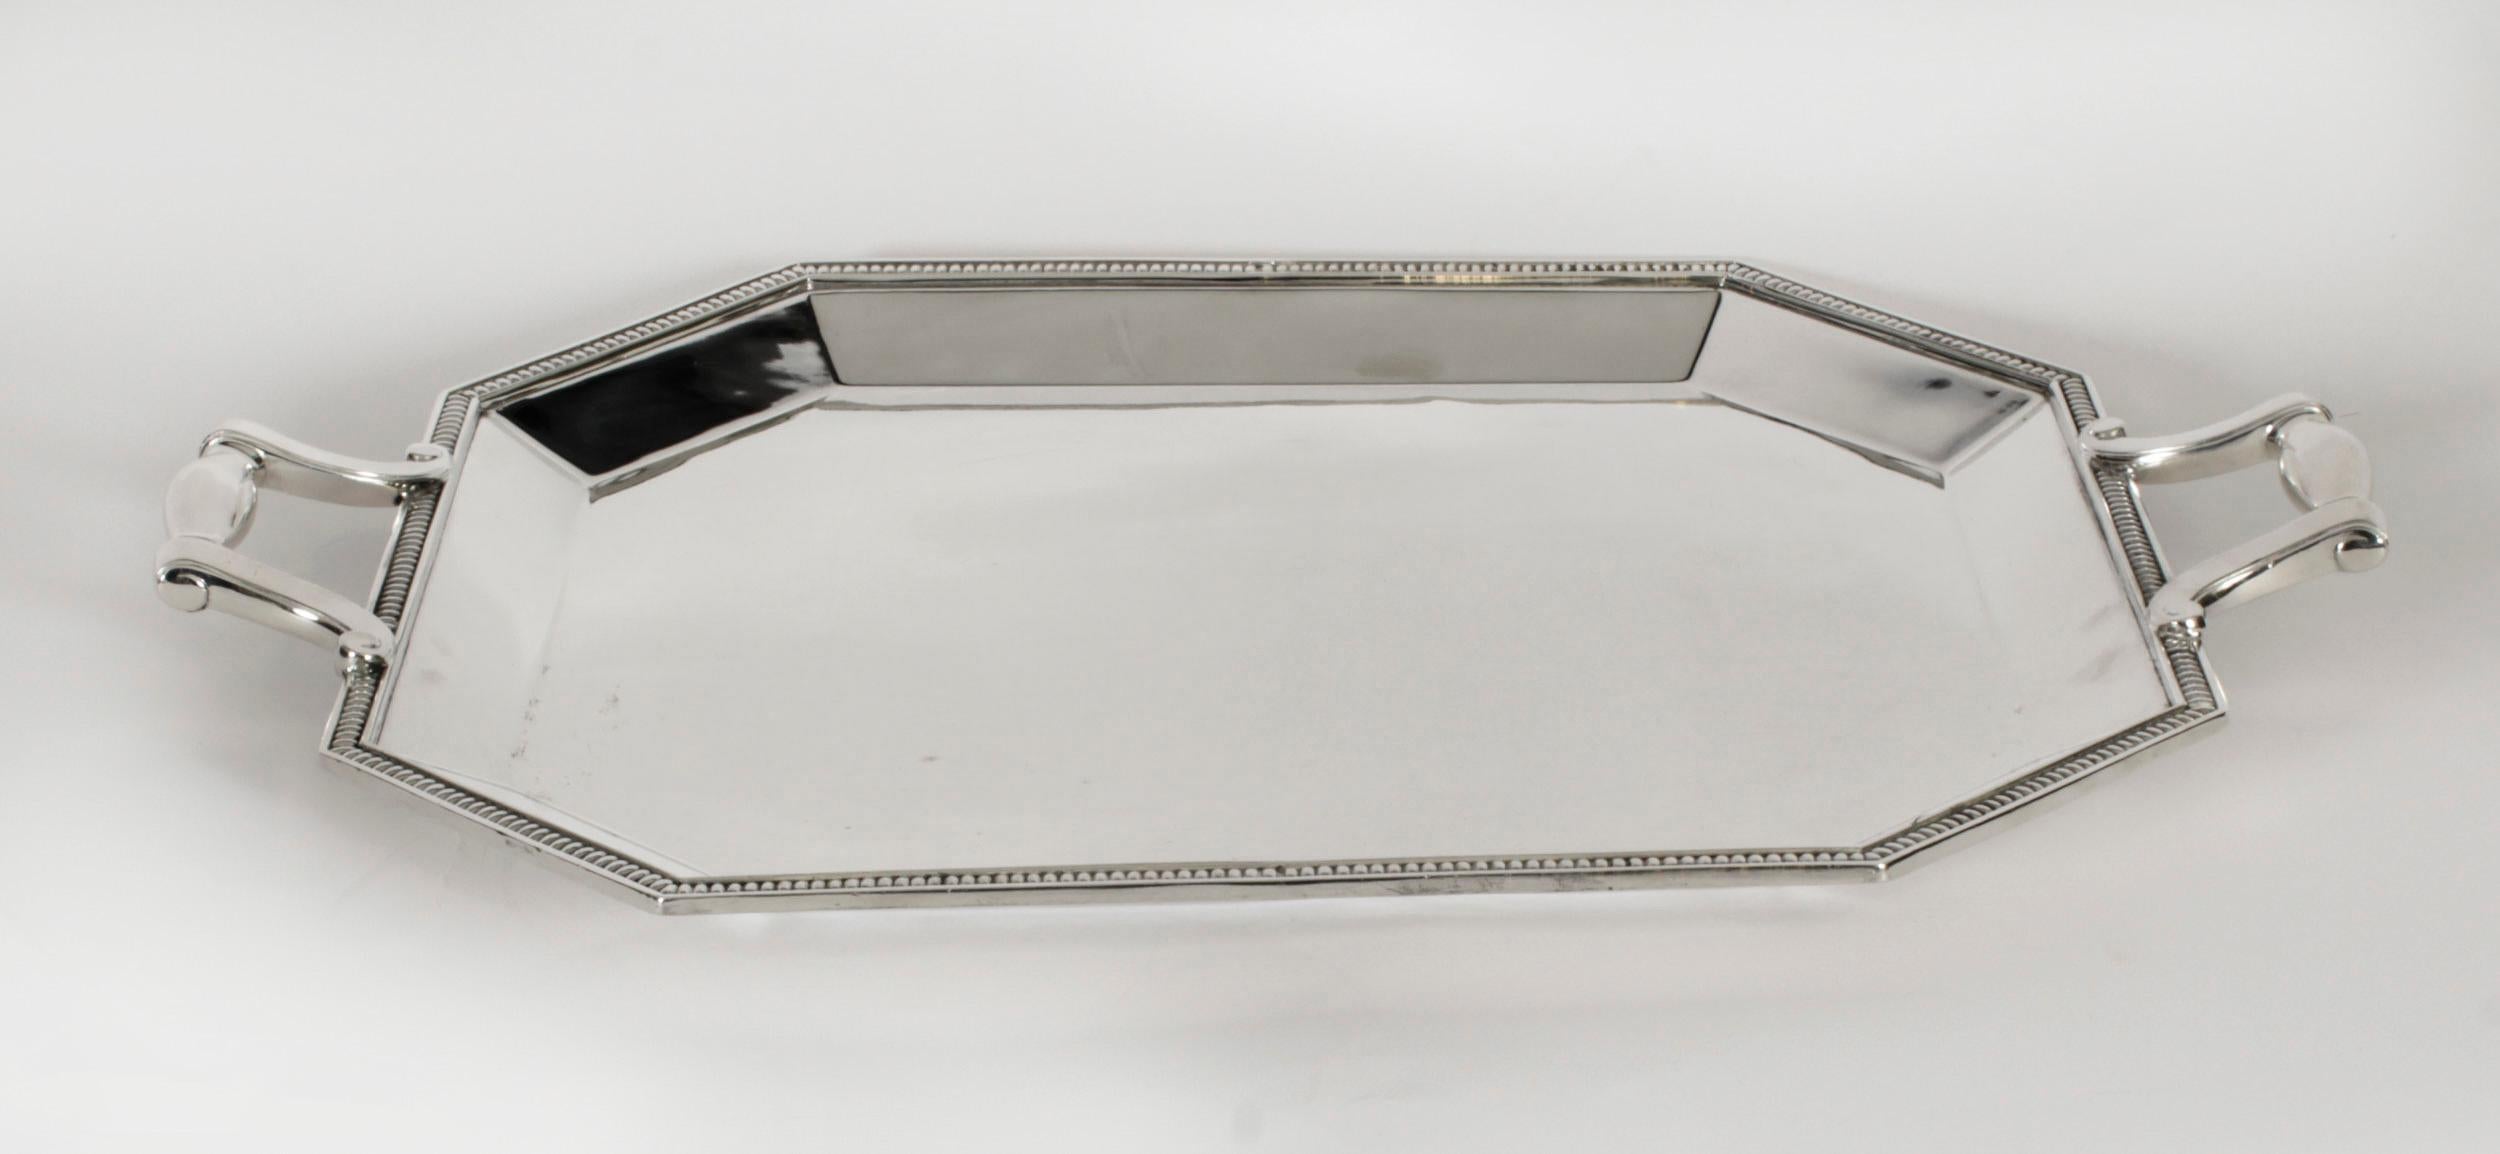 This is a high quality large antique French silver plated butlers tray bearing the makers mark of the highly sought after French silversmith and retailer Christofle, circa 1930 in date.
 
This rectangular shaped stunning tray with gut off corners